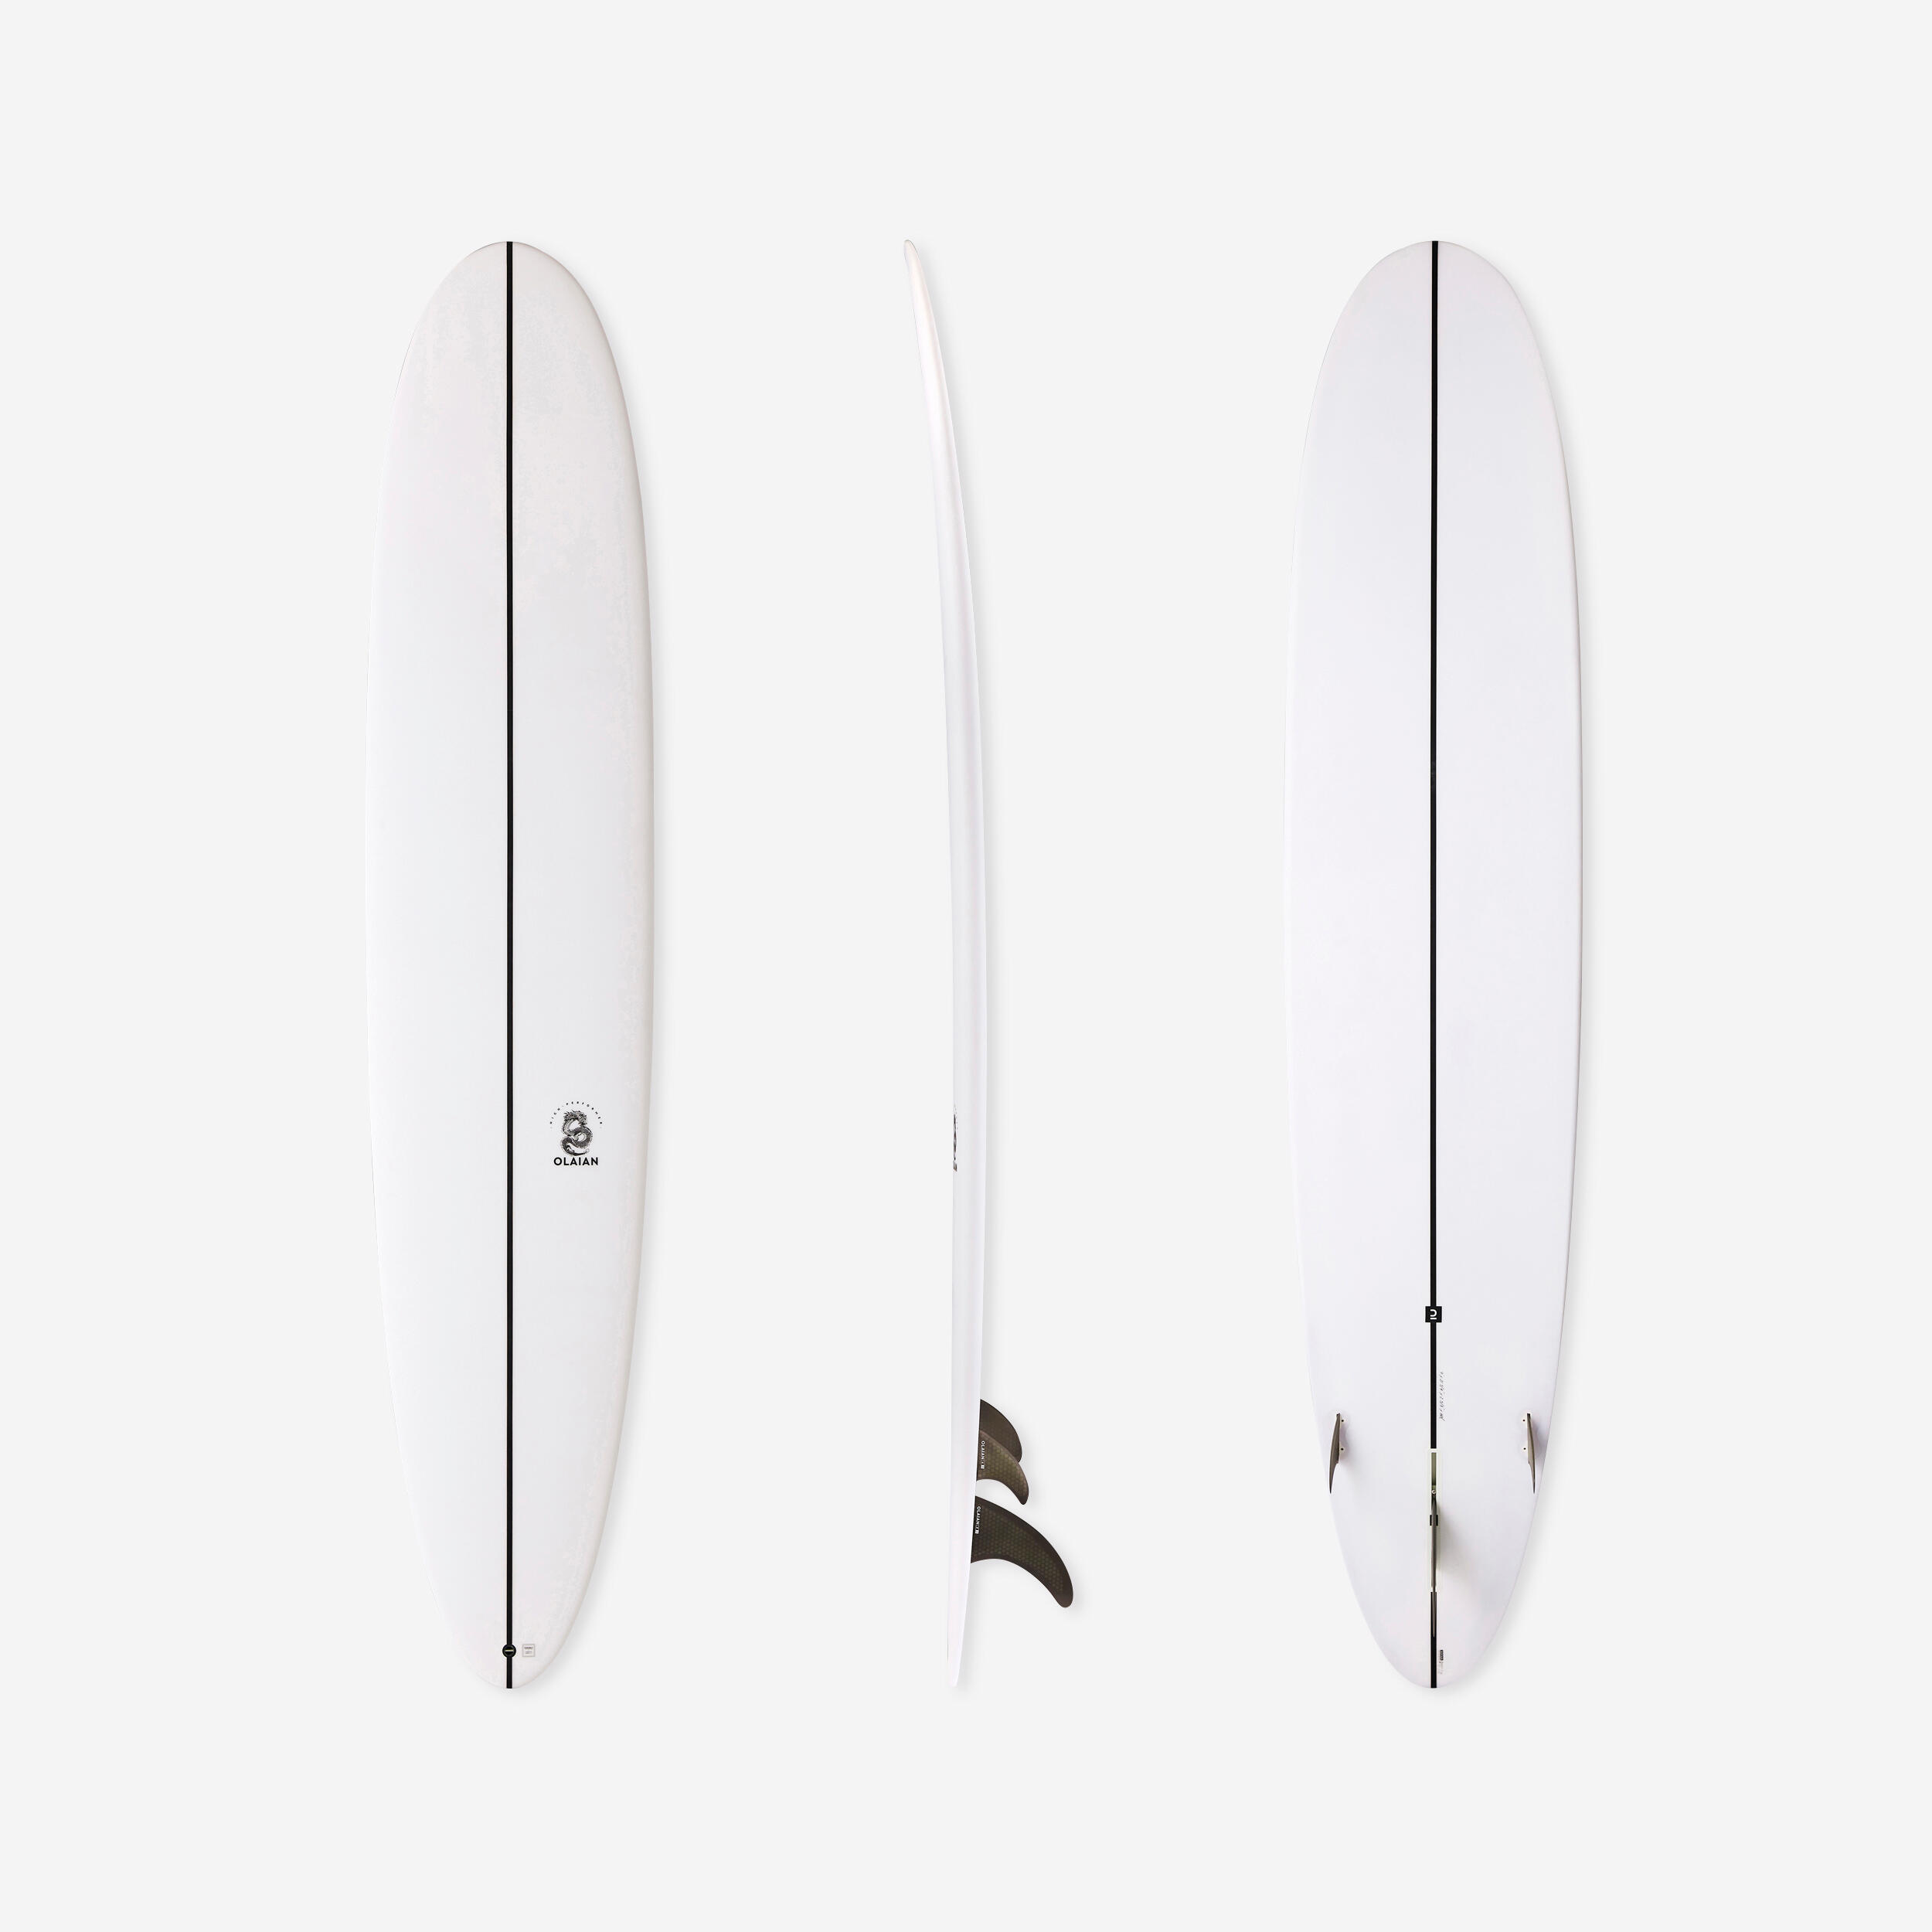 OLAIAN LONGBOARD 900 9' Performance 60 L. Comes with 2+1 setup 8" central fin.